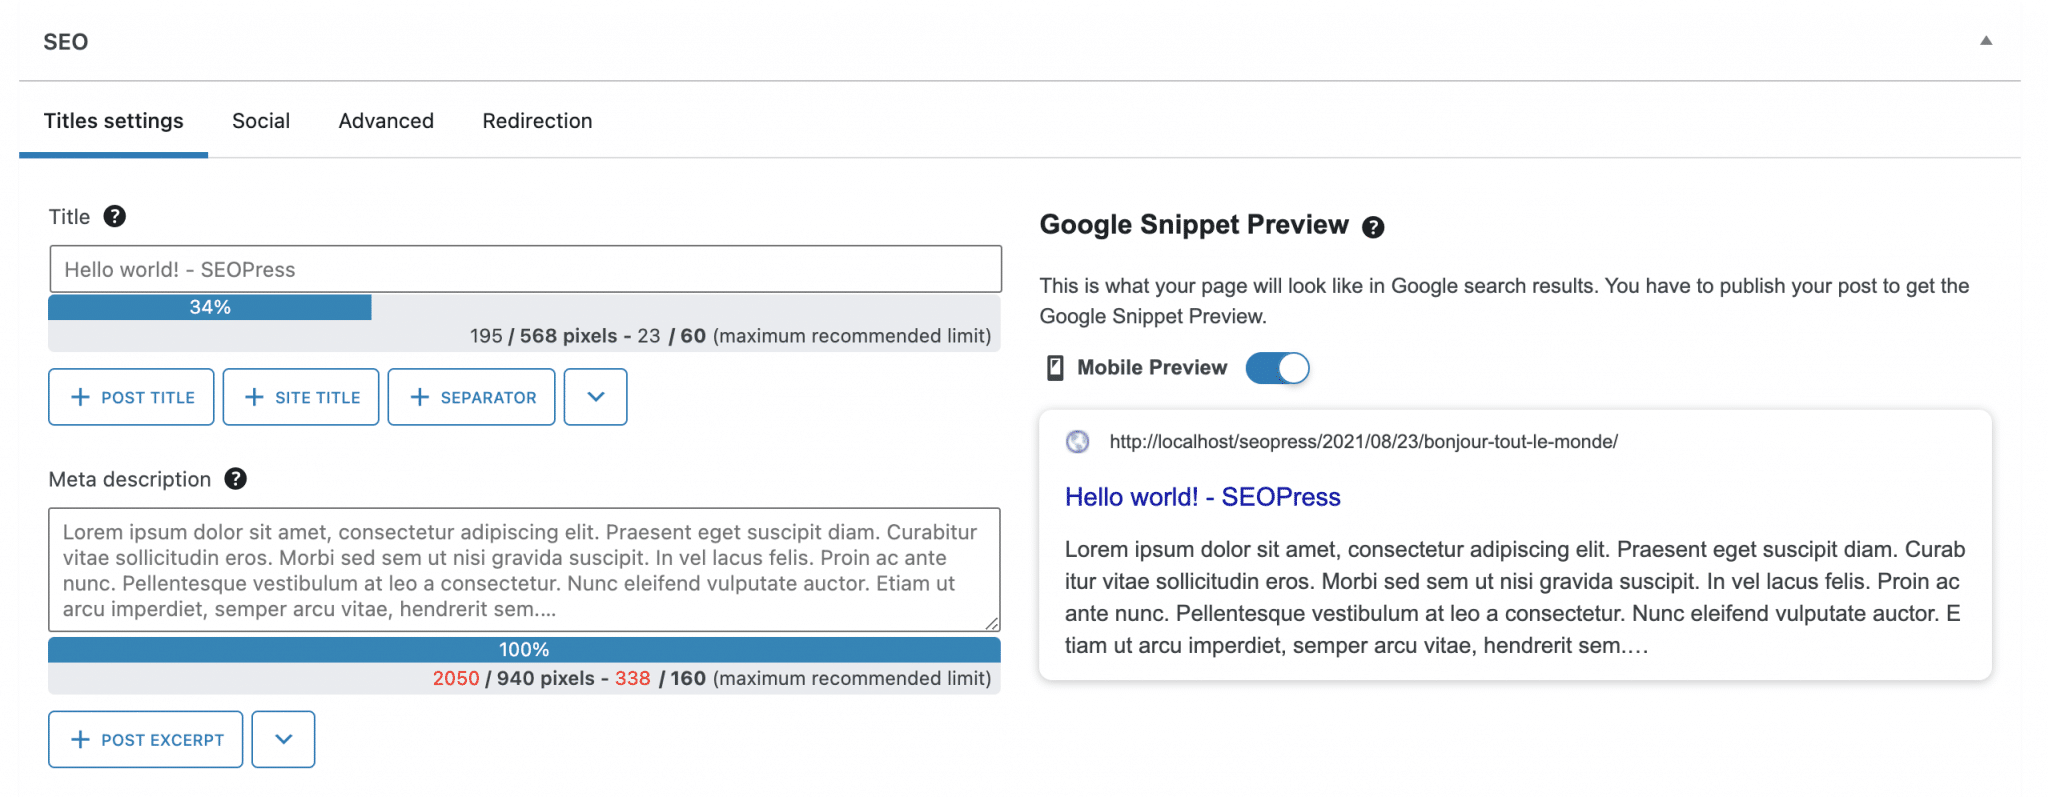 SEO and title settings with Google Snippet Preview on SEOPress.